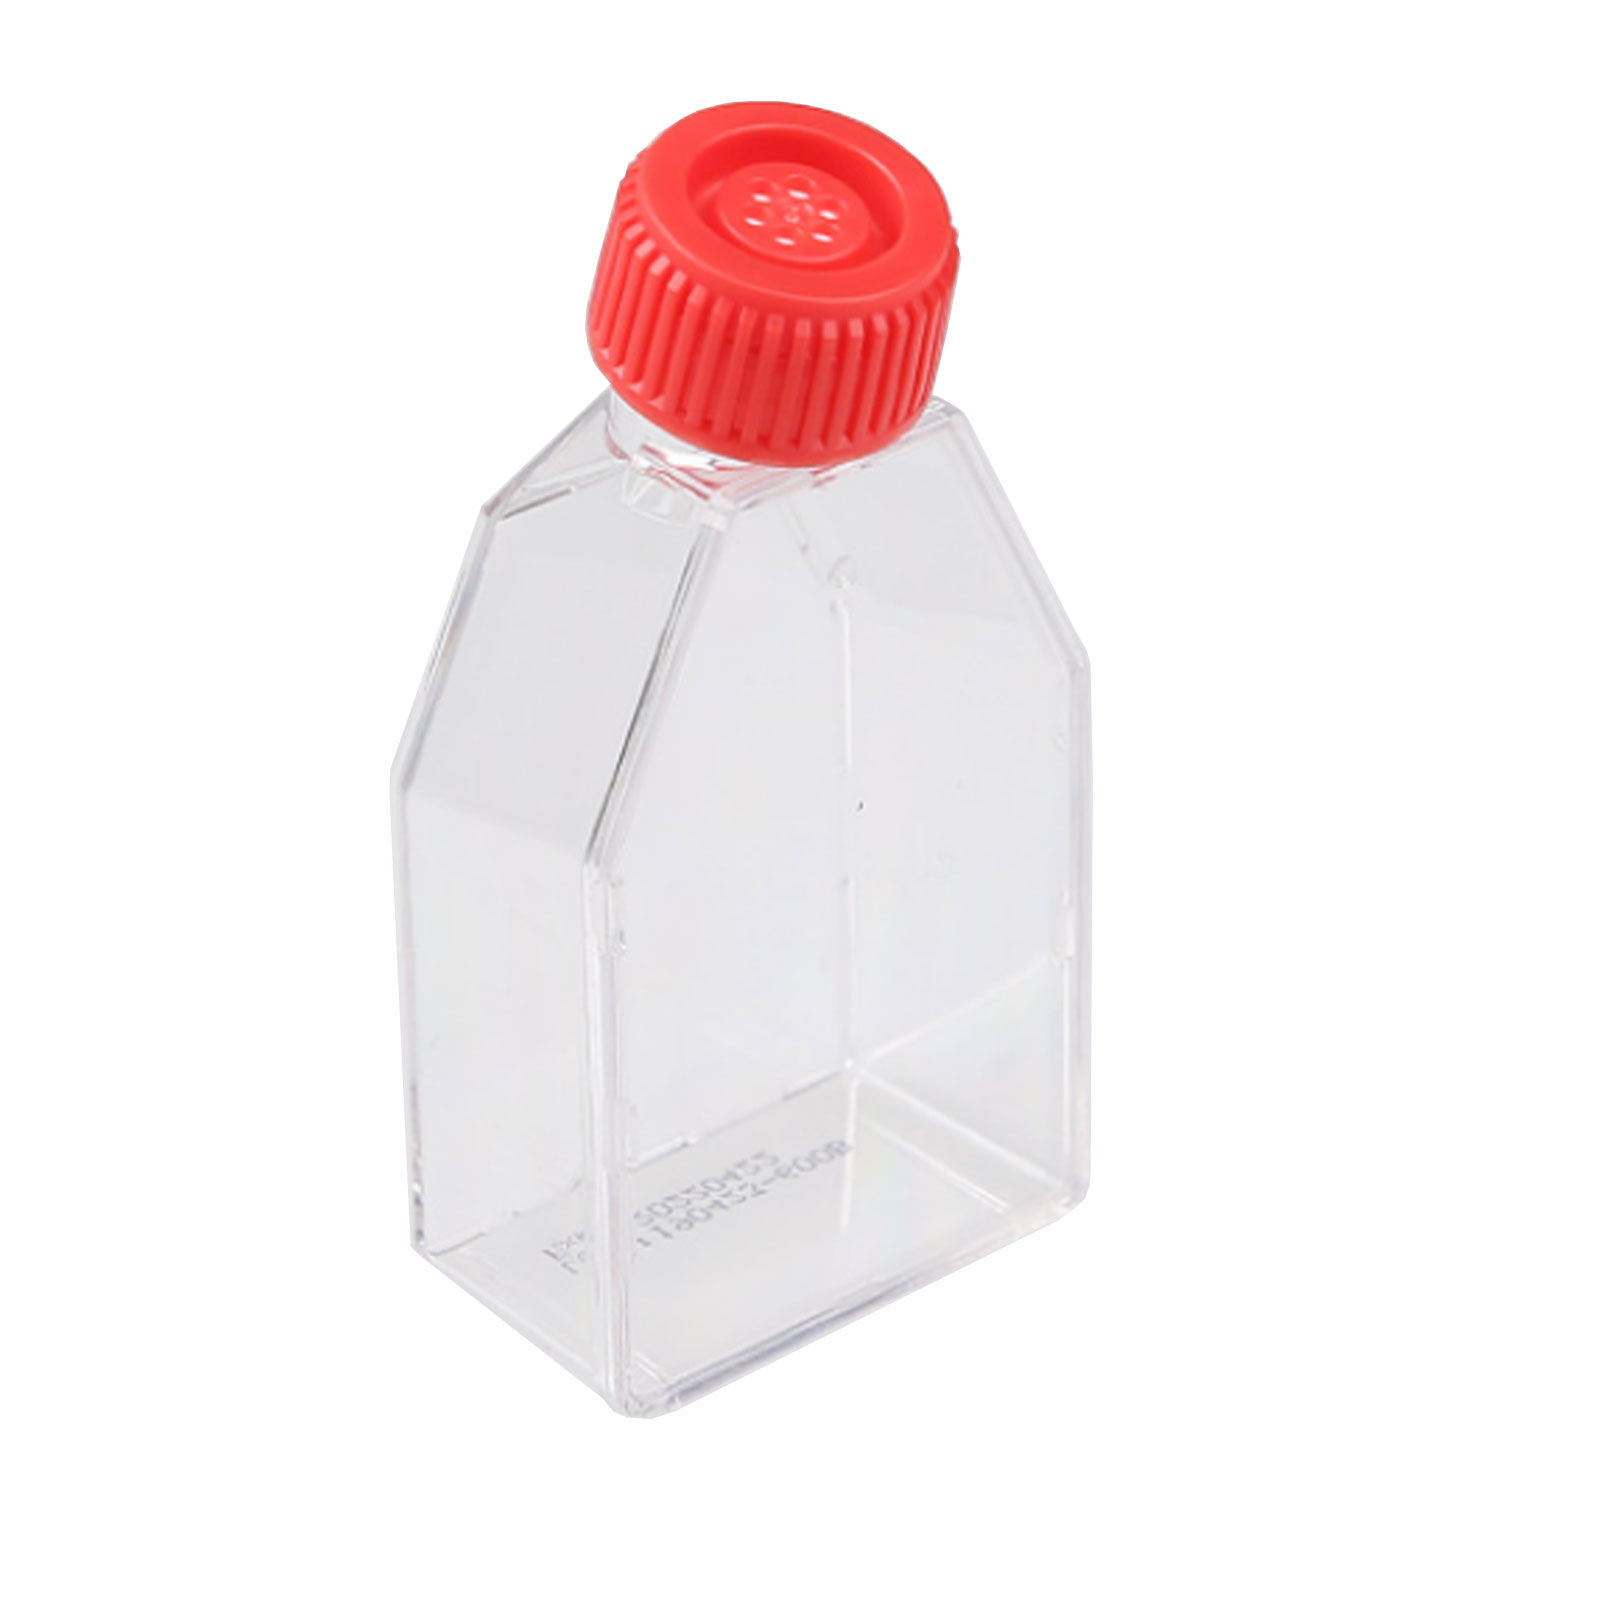 ADAMAS BETA Polystyrene Cell Culture Bottle with Breathable Cover TC Sterile Laboratory Adherent Culture Torticollis Plastic Bottles 50-850ml